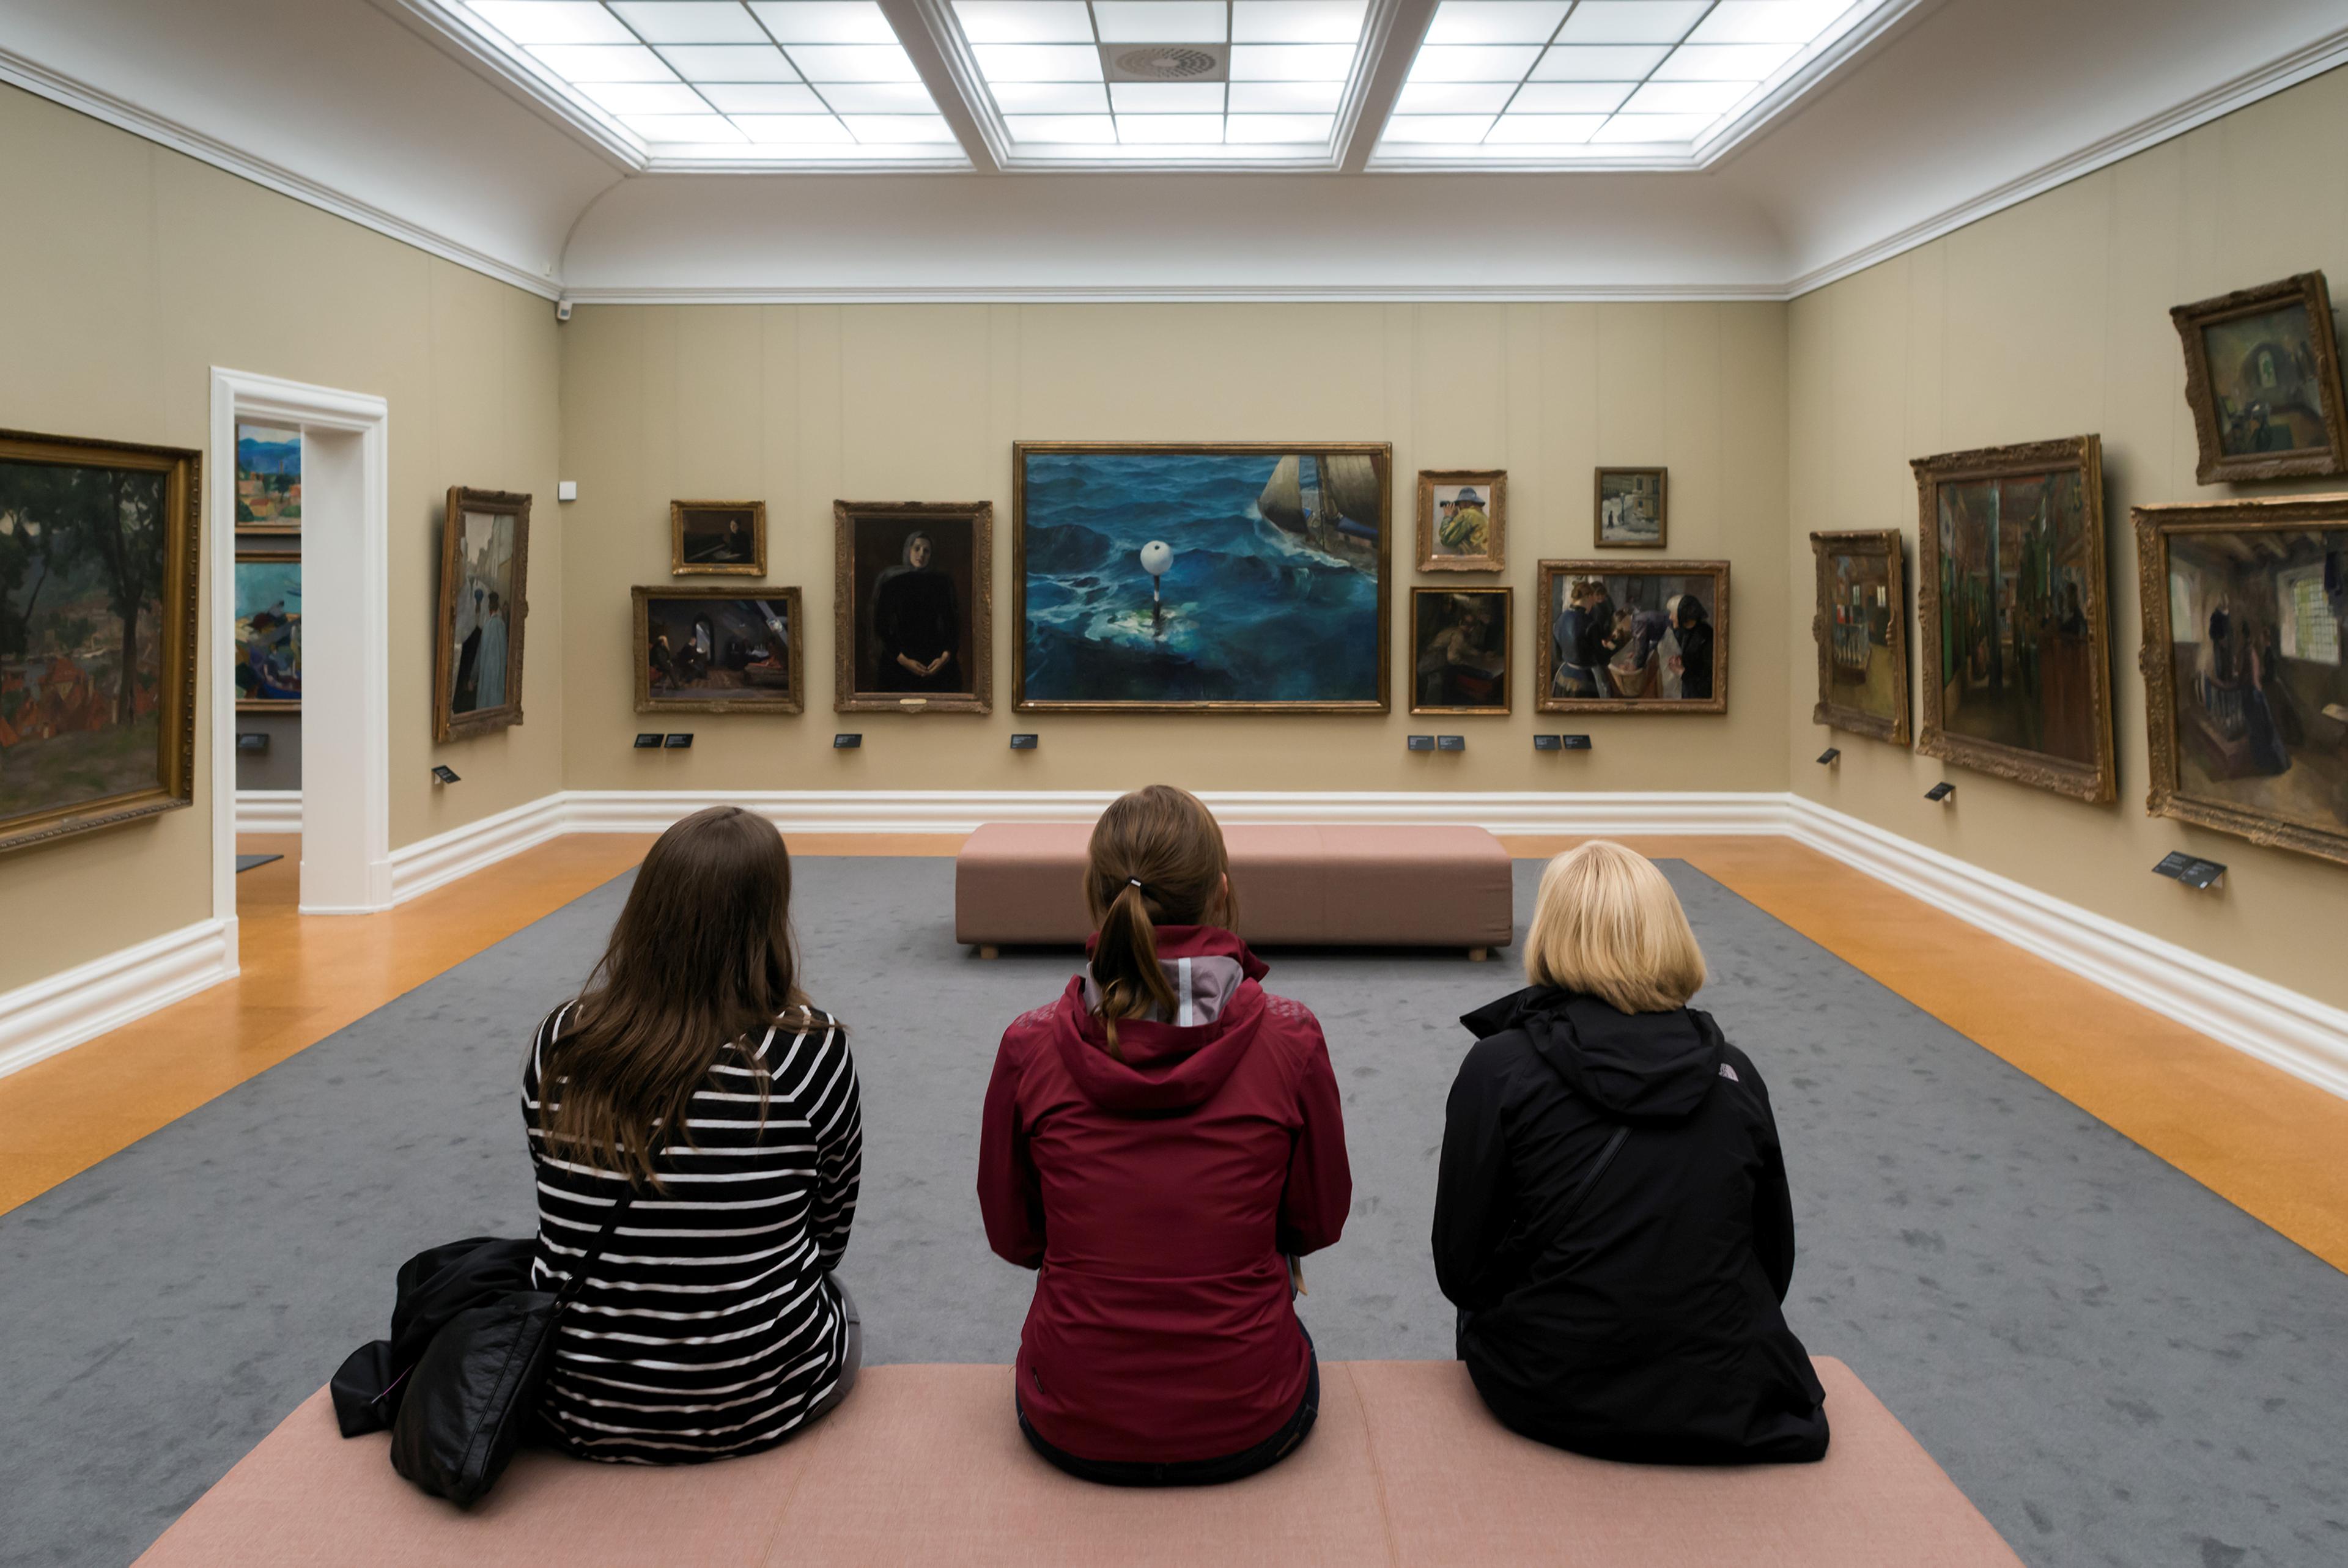 Three young people are sitting on a bench in the Rasmus Meyer collection, with paintings by Christian Krohg in the background.